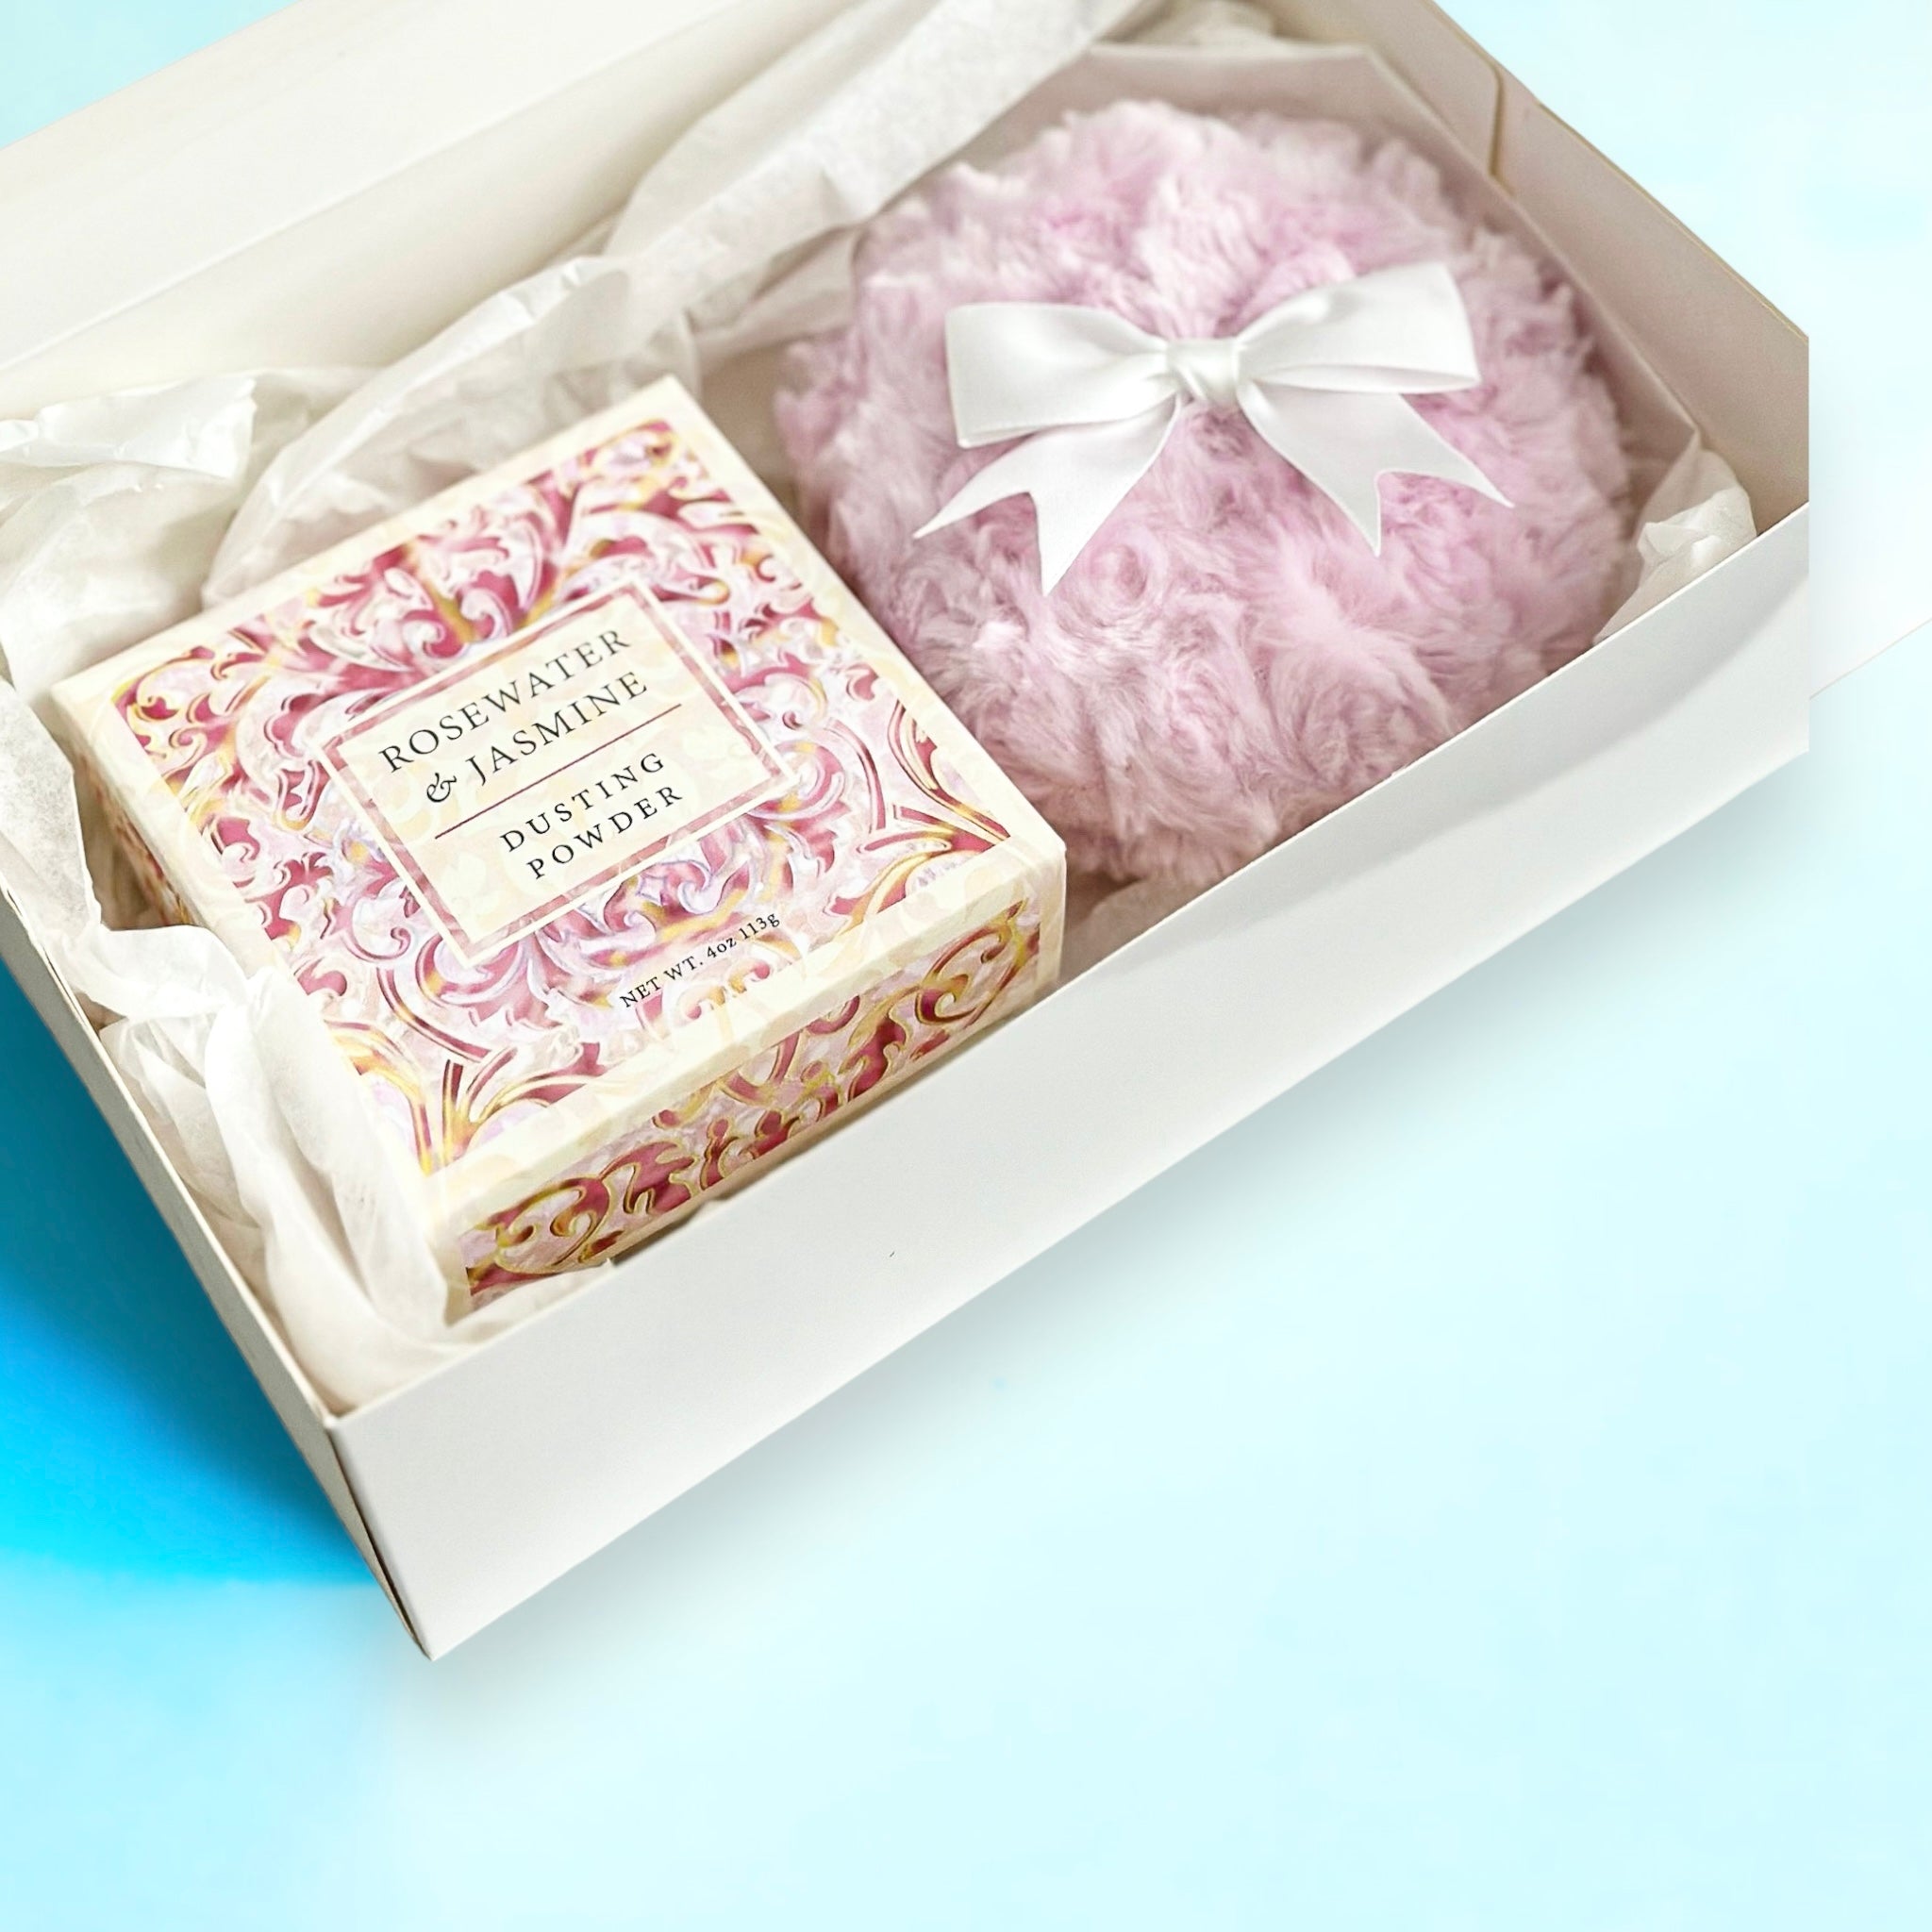 Dusting Powder & Puff GIFT SET - Greenwich Bay Trading Company + Luxe Puffs  - Rosewater Jasmine